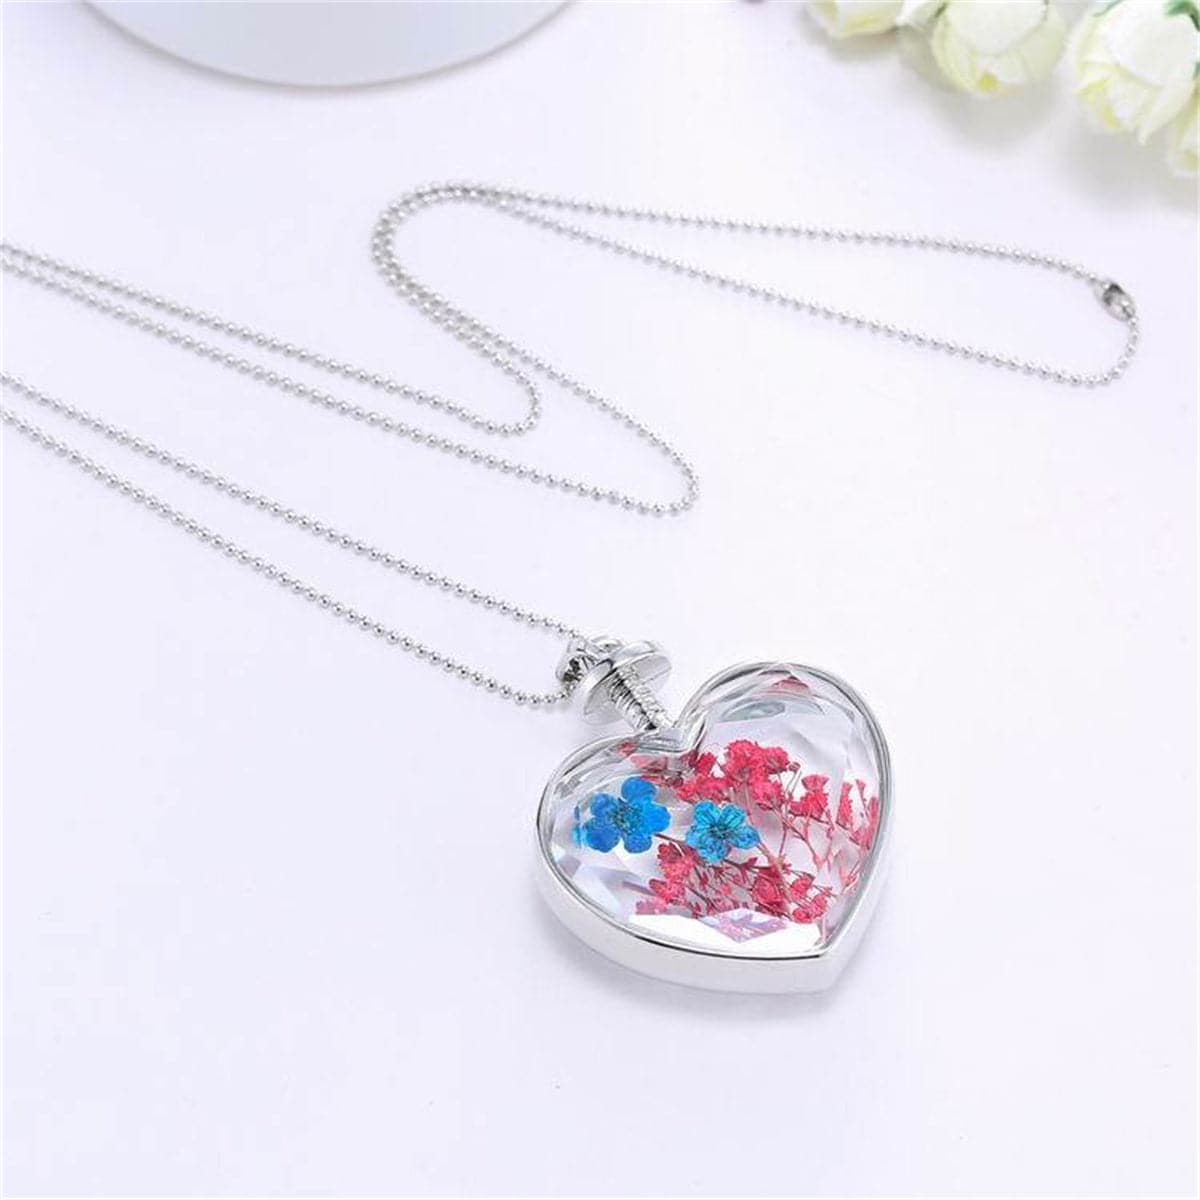 Blue Pressed Peach Blossom & Silver-Plated Heart Pendant Necklace